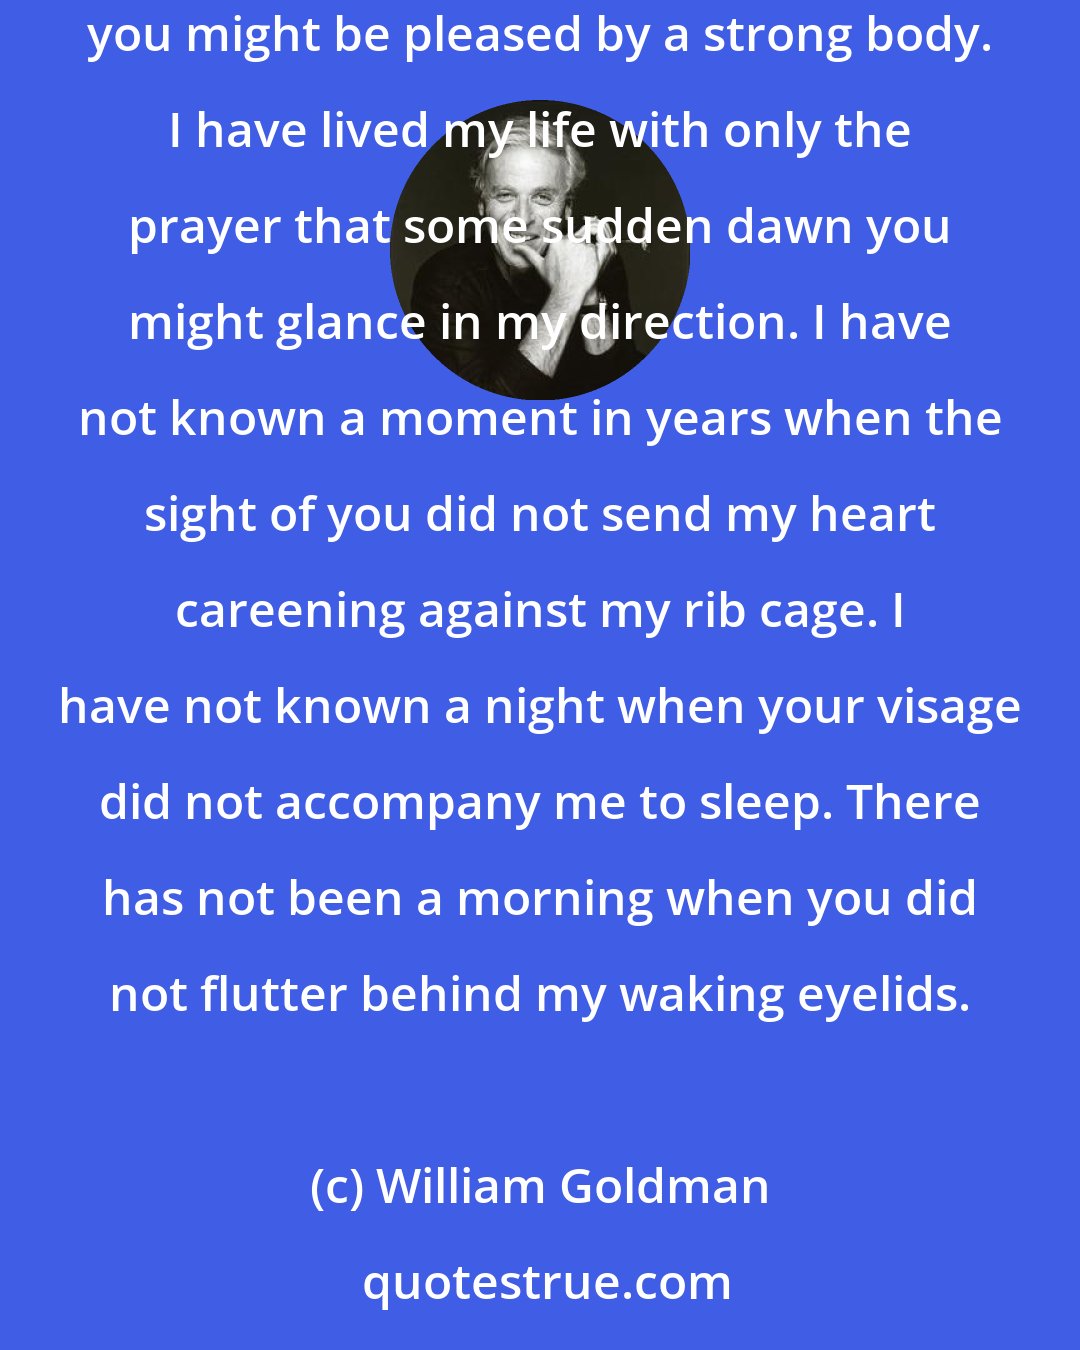 William Goldman: I have stayed these years in my hovel because of you. I have taught myself languages because of you. I have made my body strong because I thought you might be pleased by a strong body. I have lived my life with only the prayer that some sudden dawn you might glance in my direction. I have not known a moment in years when the sight of you did not send my heart careening against my rib cage. I have not known a night when your visage did not accompany me to sleep. There has not been a morning when you did not flutter behind my waking eyelids.